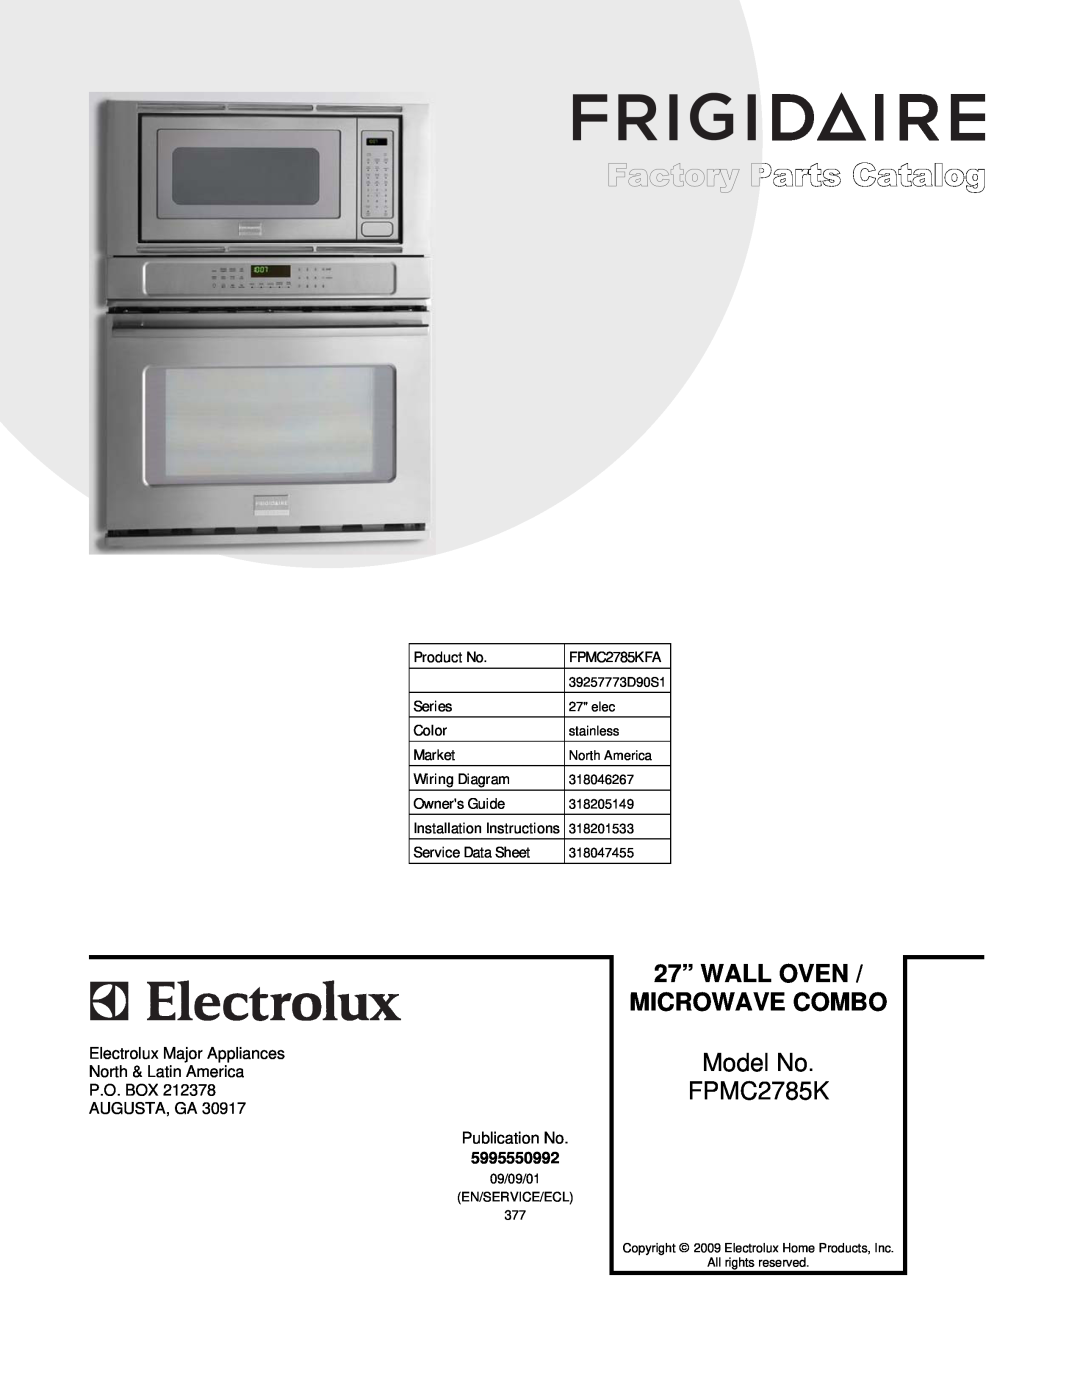 Frigidaire installation instructions 27” WALL OVEN, Microwave Combo, Model No, DFPMC2785KFA.eps 318046267.eps 